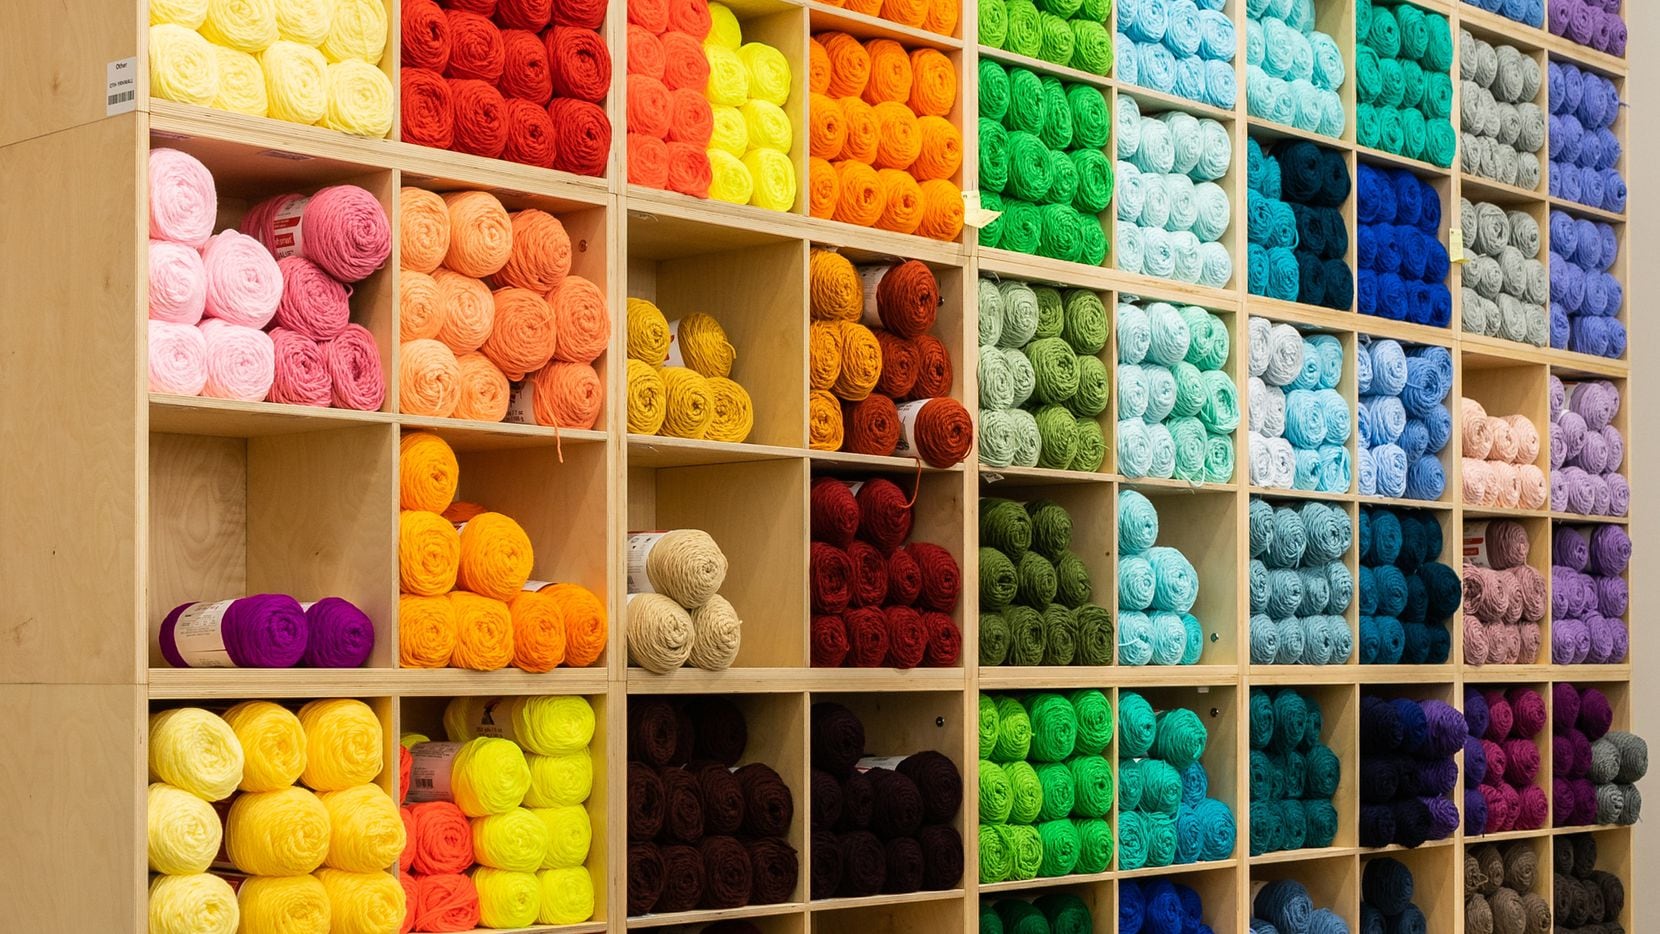 Wall of yarn at a Michaels arts and crafts store.